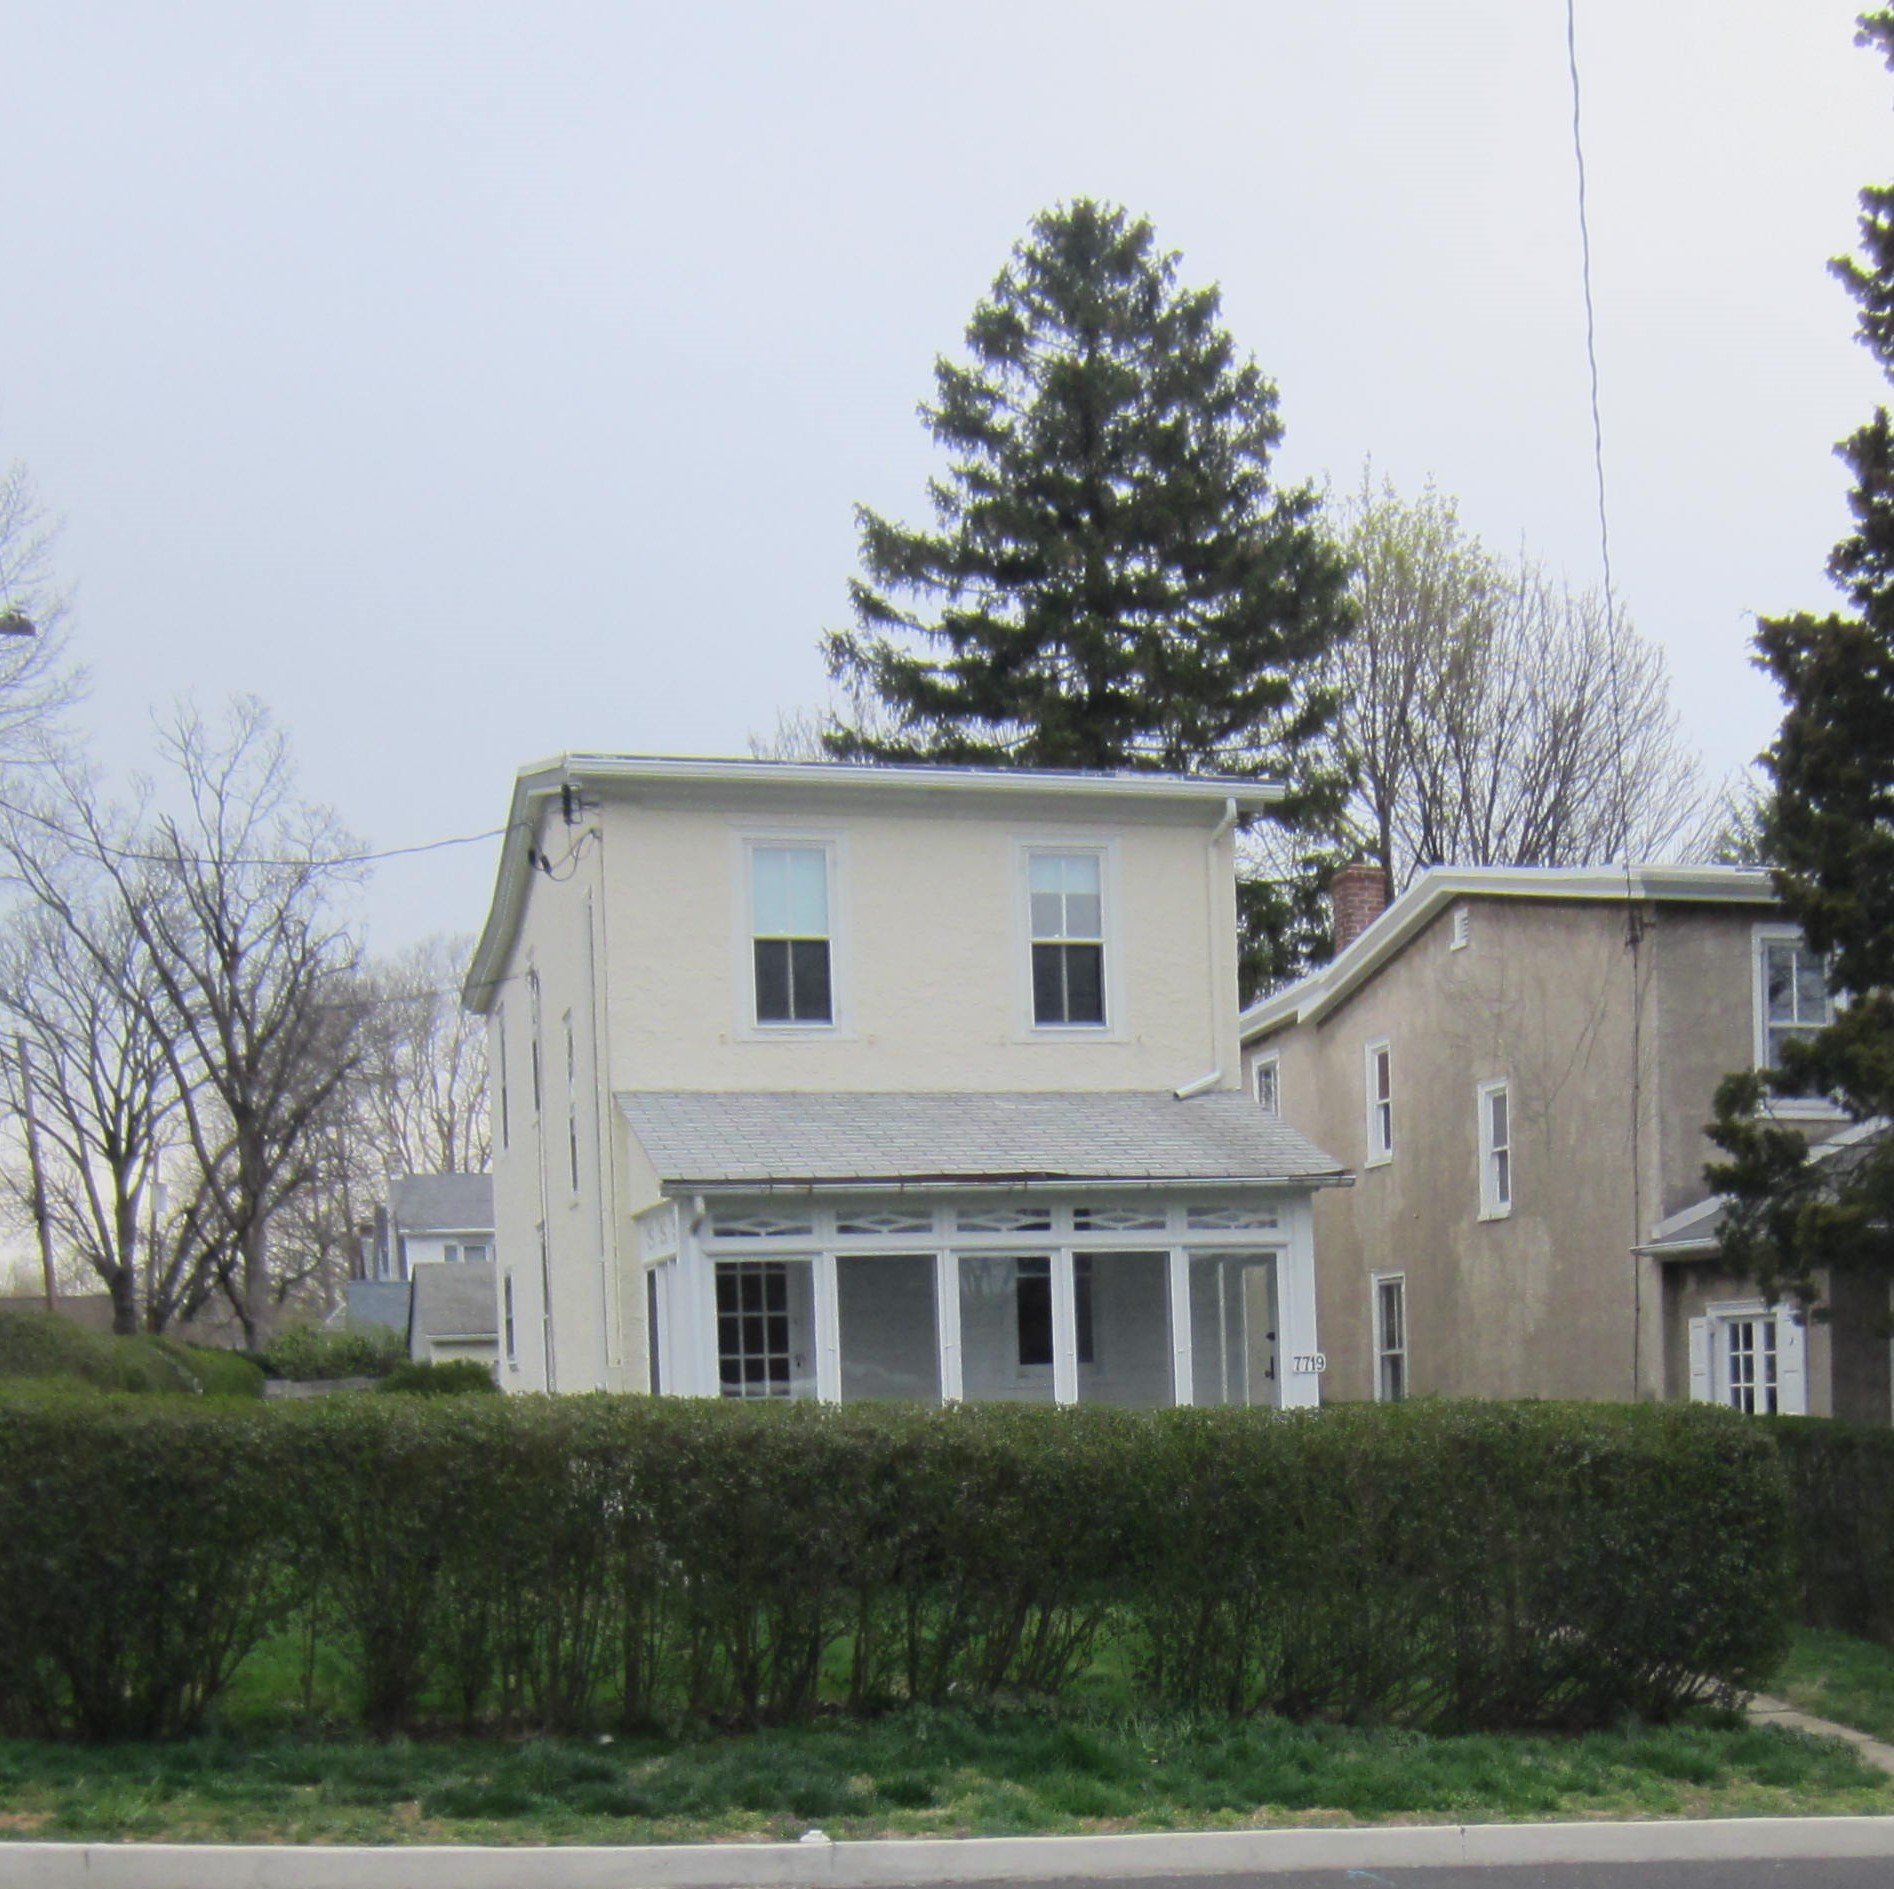 High Velocity AC Adds High Value Cooling to Glenside, PA House